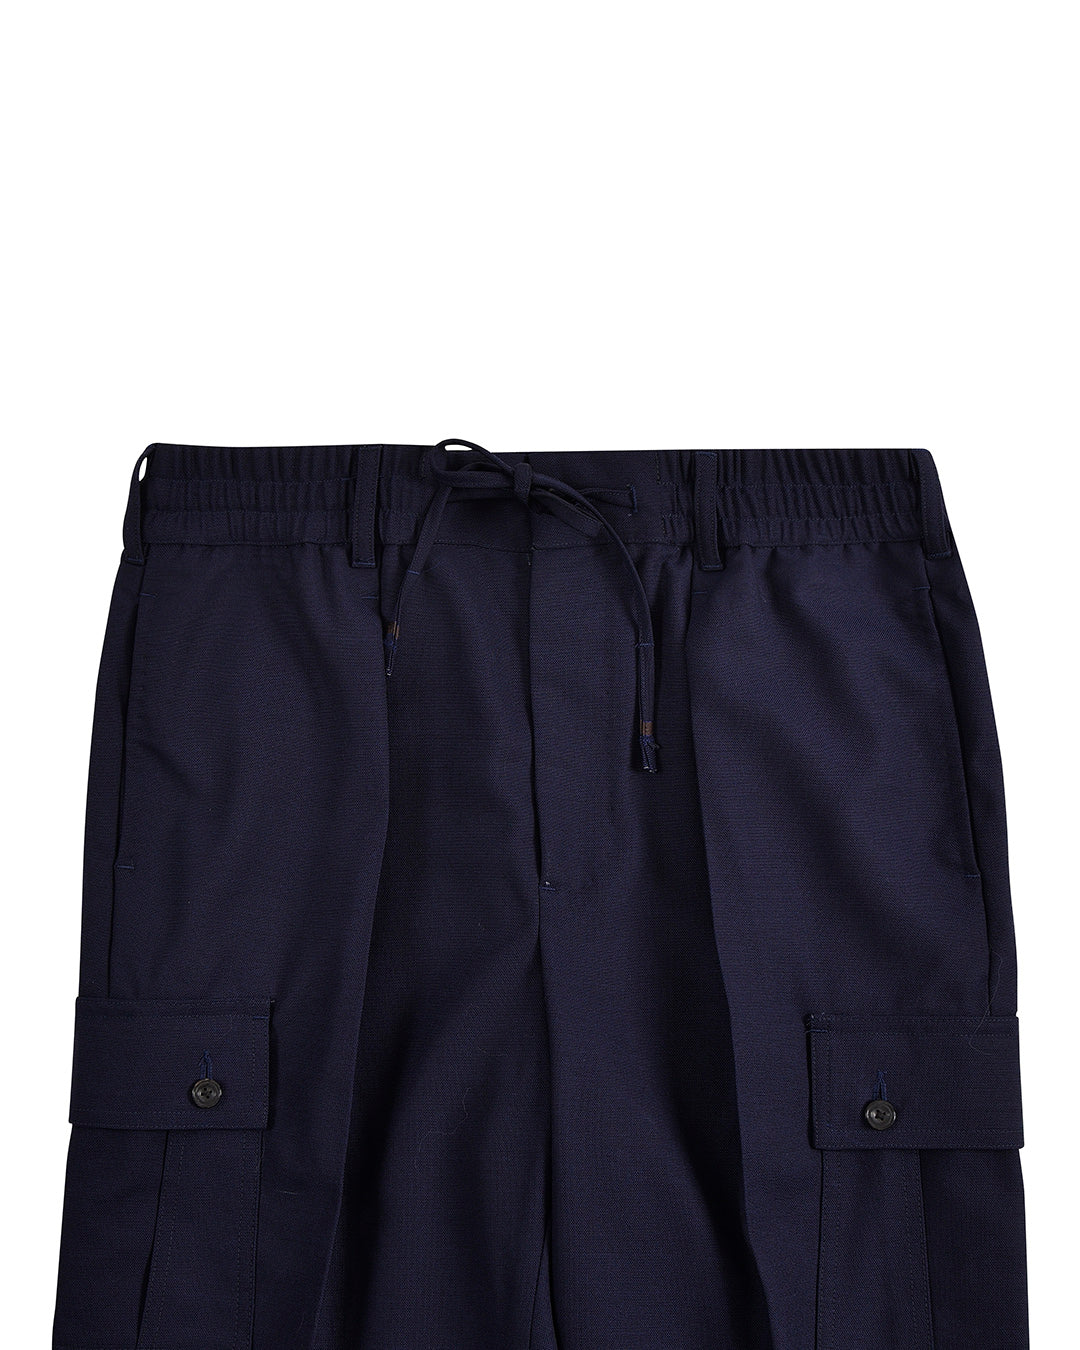 Front view of custom cargo pants for men by Luxire in navy